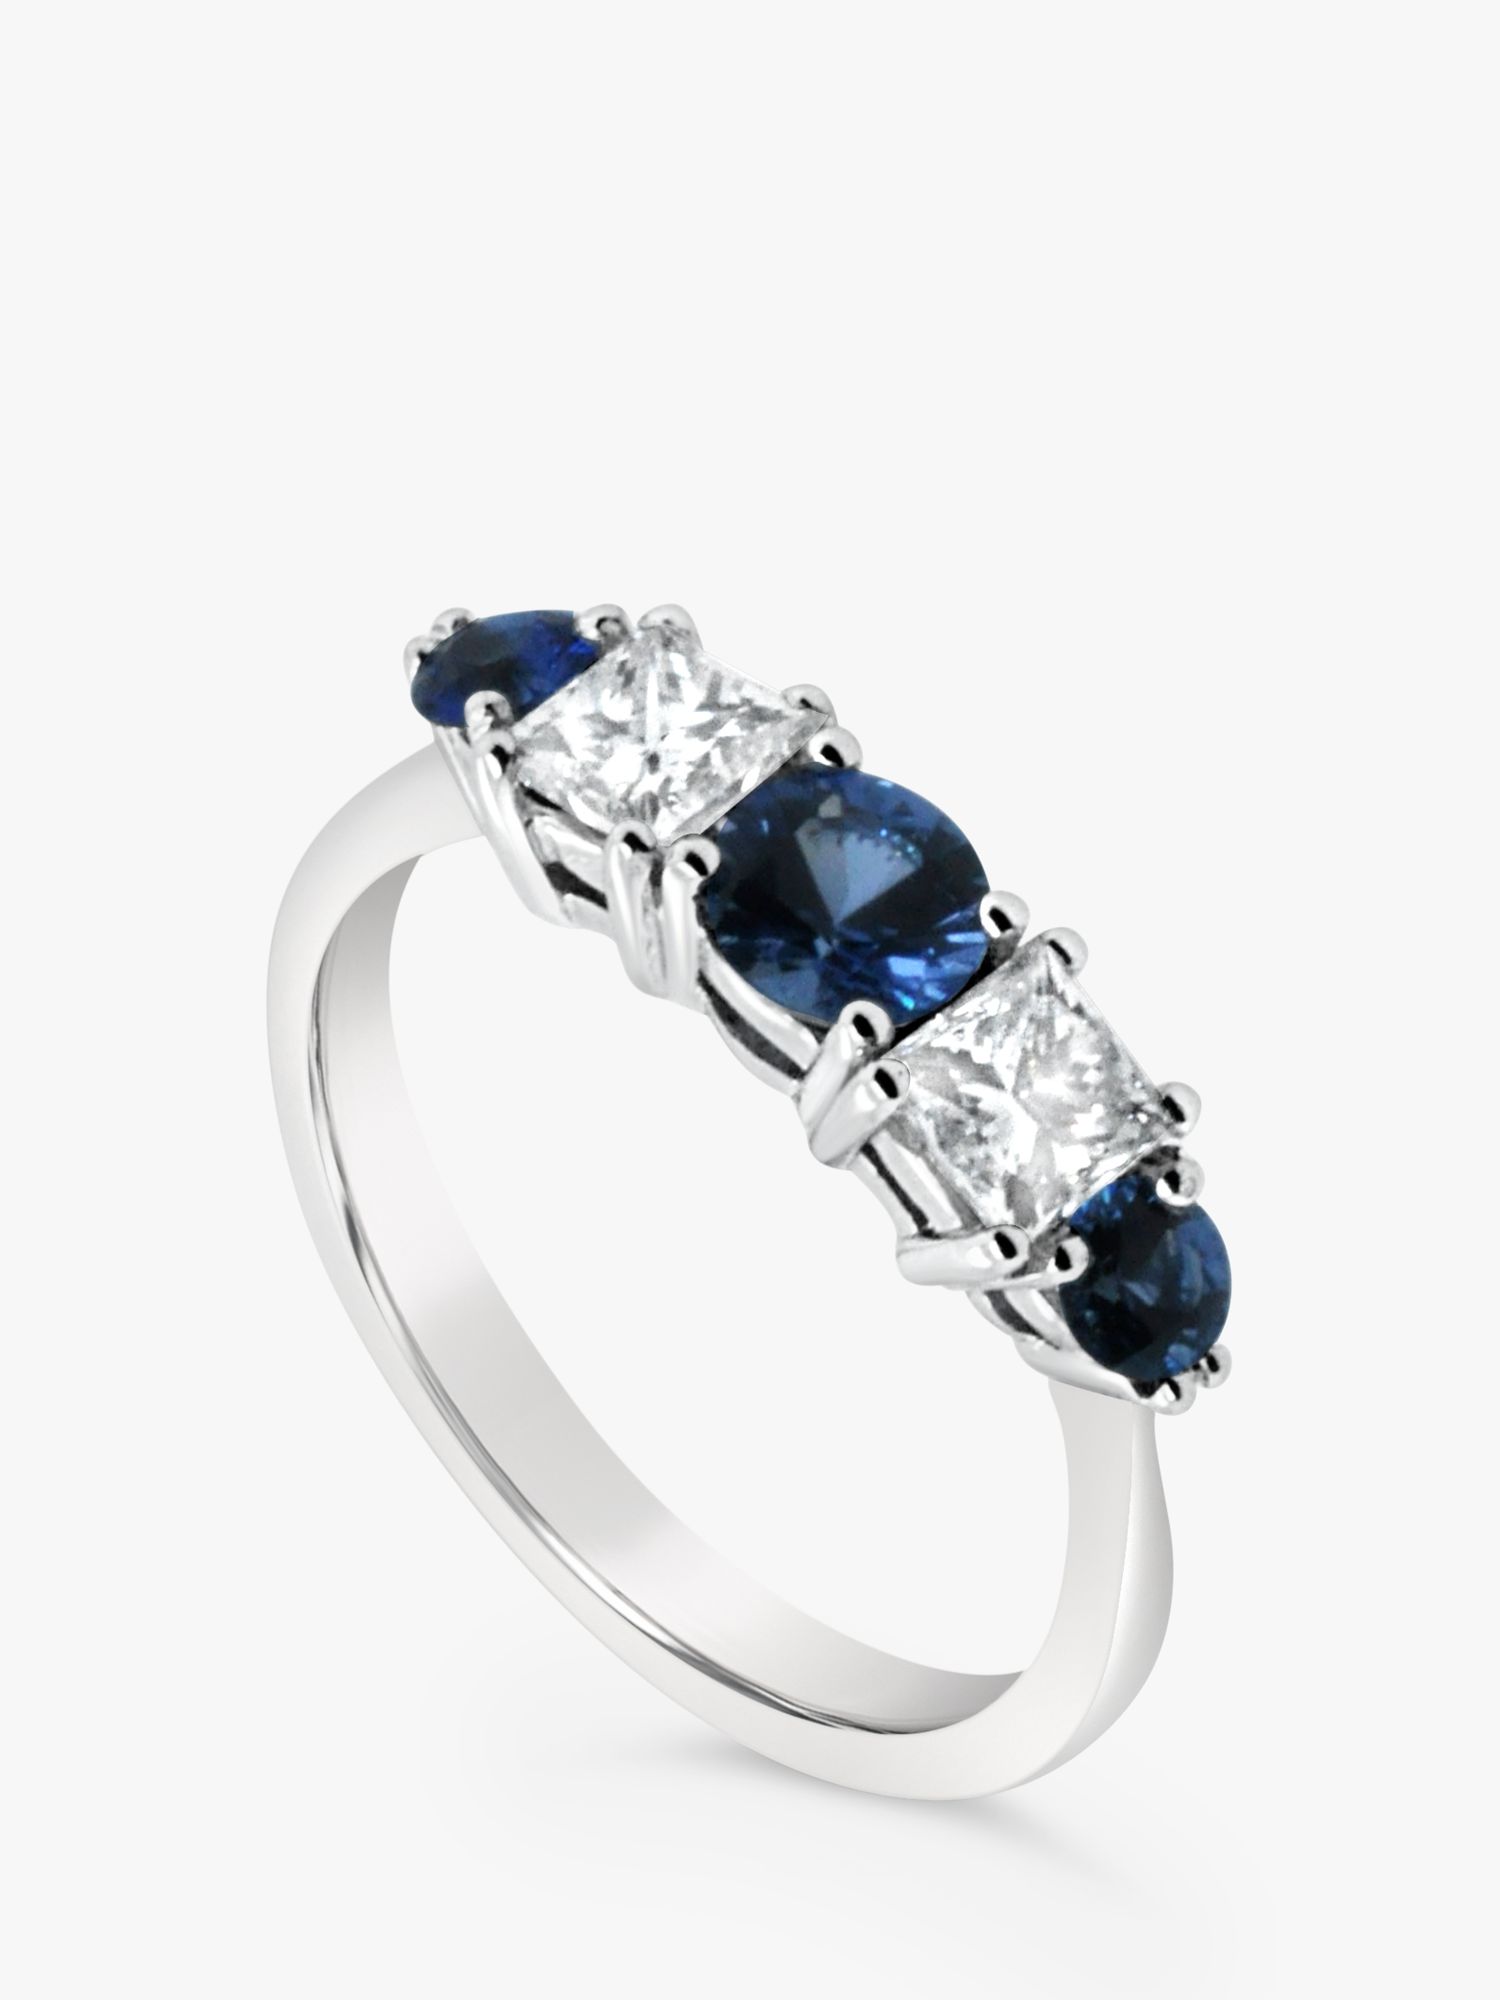 Buy Milton & Humble Jewellery Second Hand 18ct White Gold Sapphire & Diamond Ring, Dated London 2006 Online at johnlewis.com